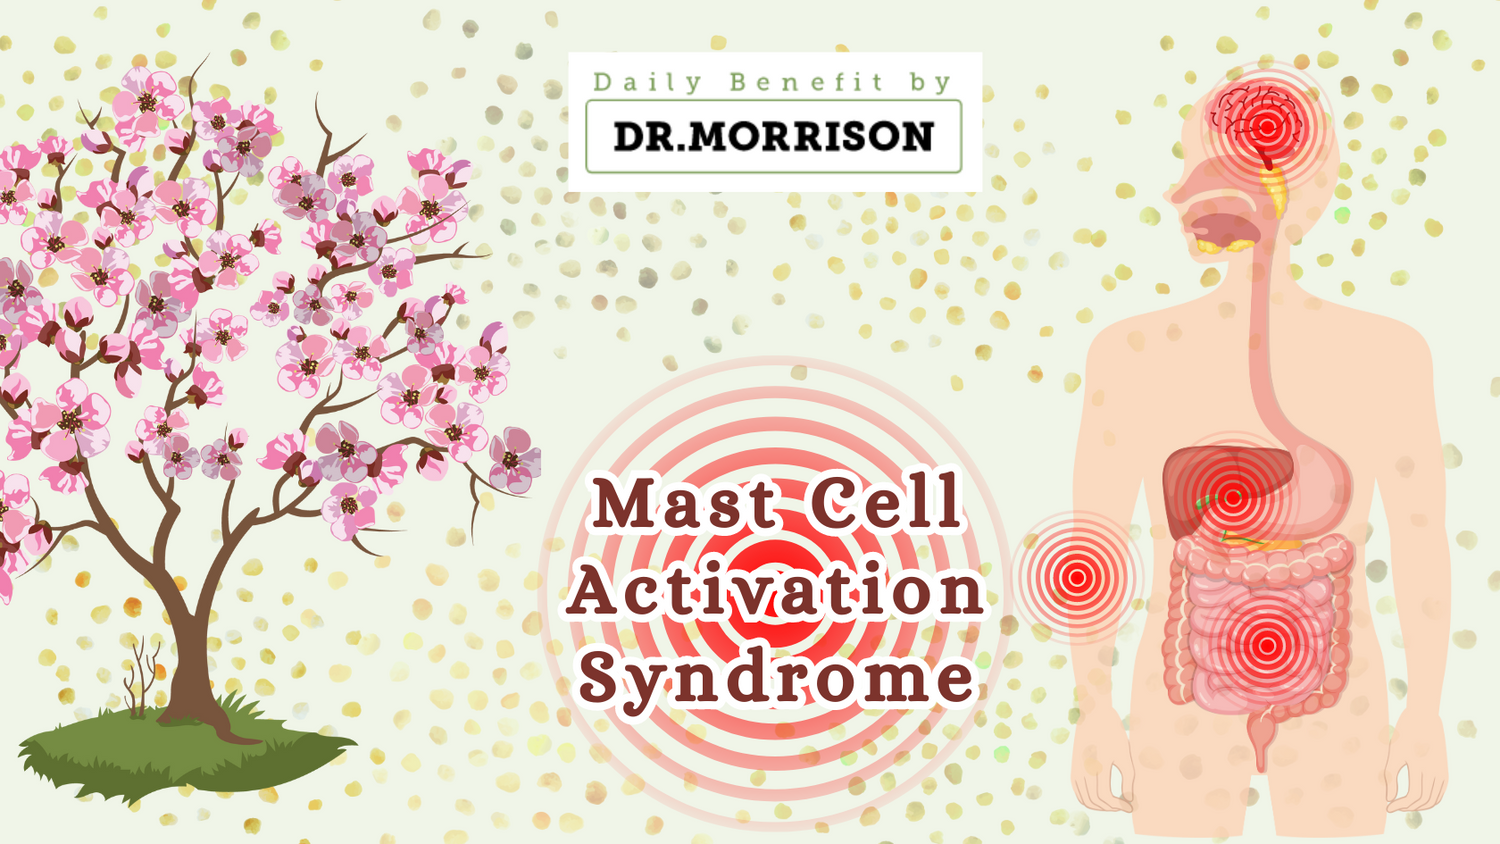 Is Mast Cell Activation Behind Your Chronic Symptoms?